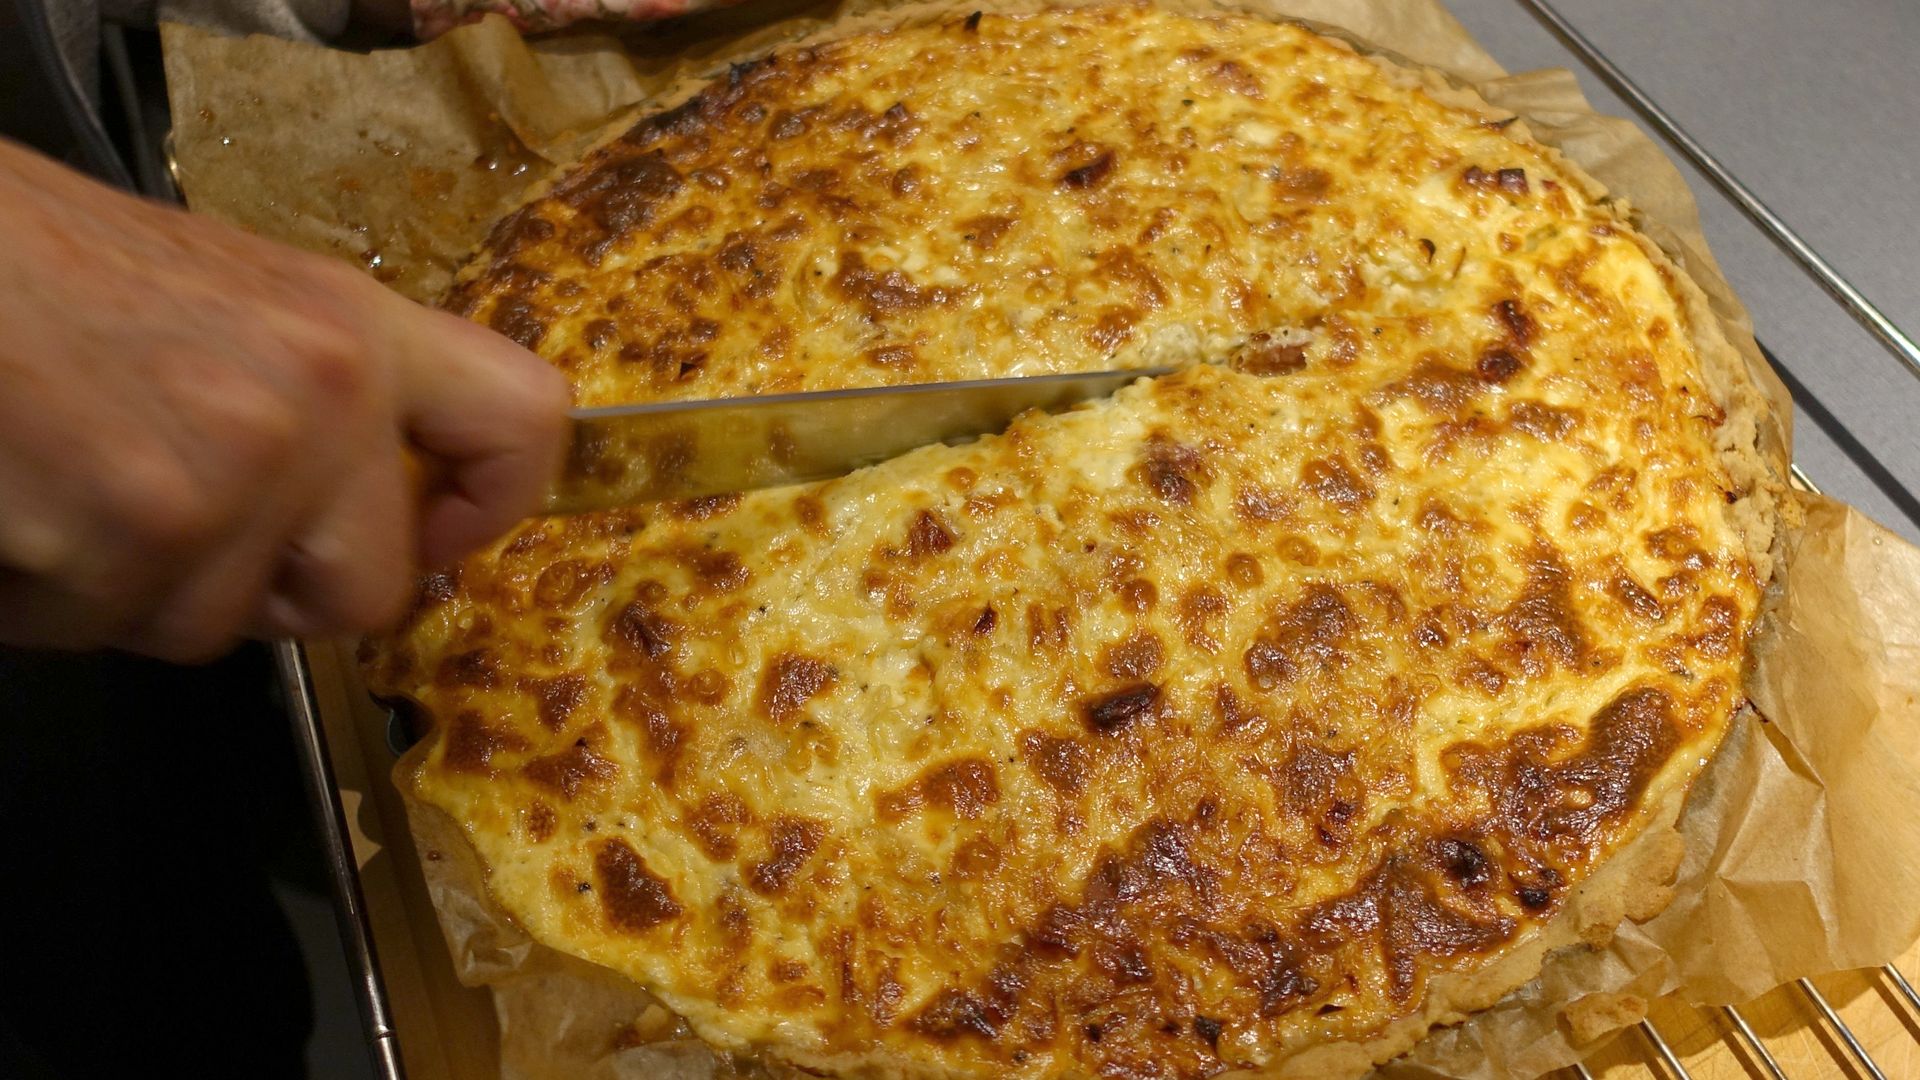 A hand holding a knife cuts into an onion cake. 